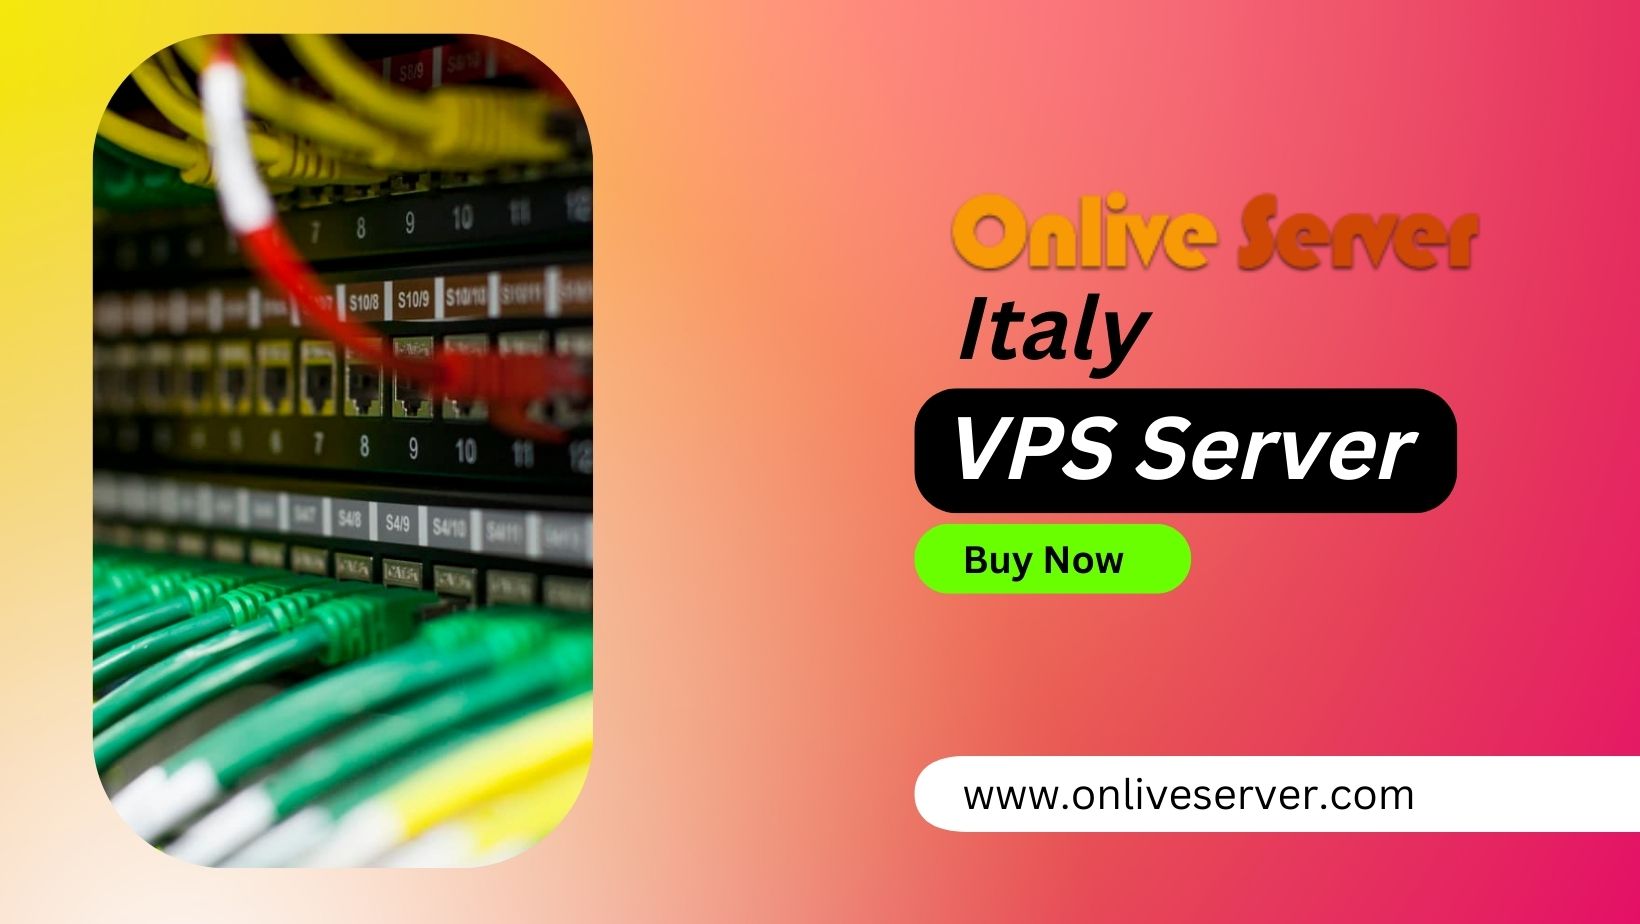 Why Italy VPS Server Best Option for Quick and Reliable Services